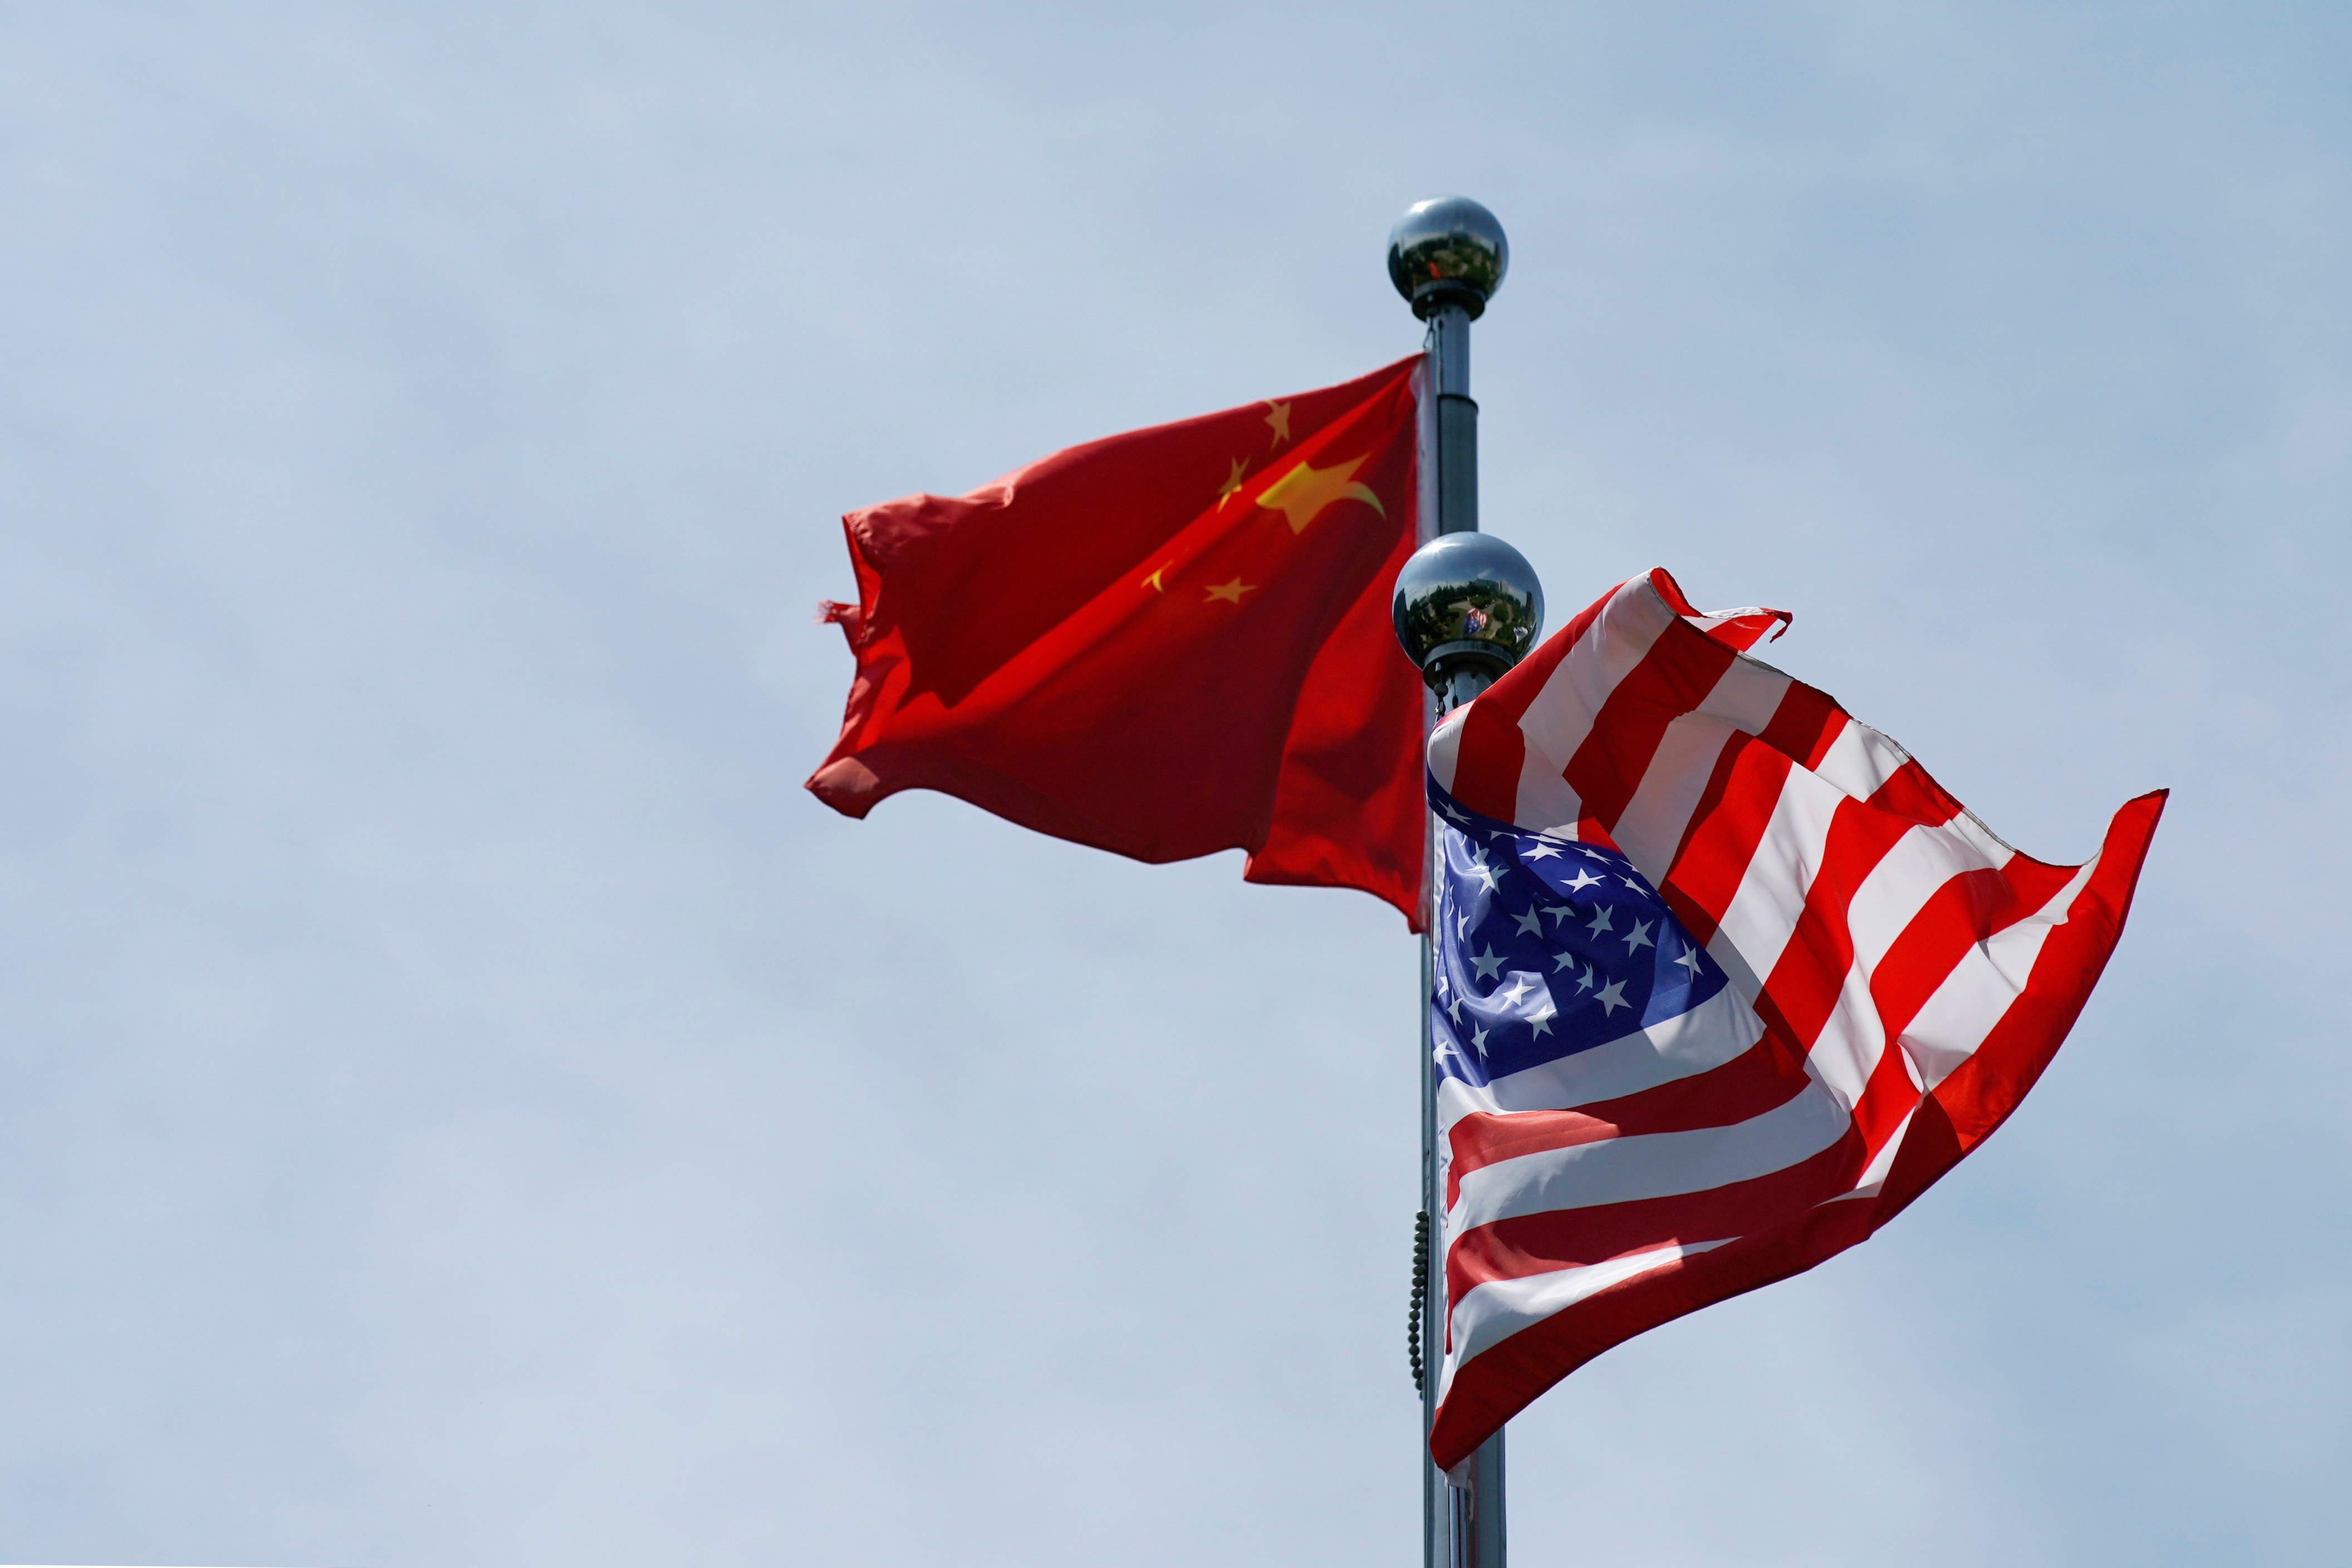 The Chinese and US flags flutter near the Bund on July 30, ahead of a meeting between US trade delegates and their Chinese counterparts in Shanghai. Photo: Reuters